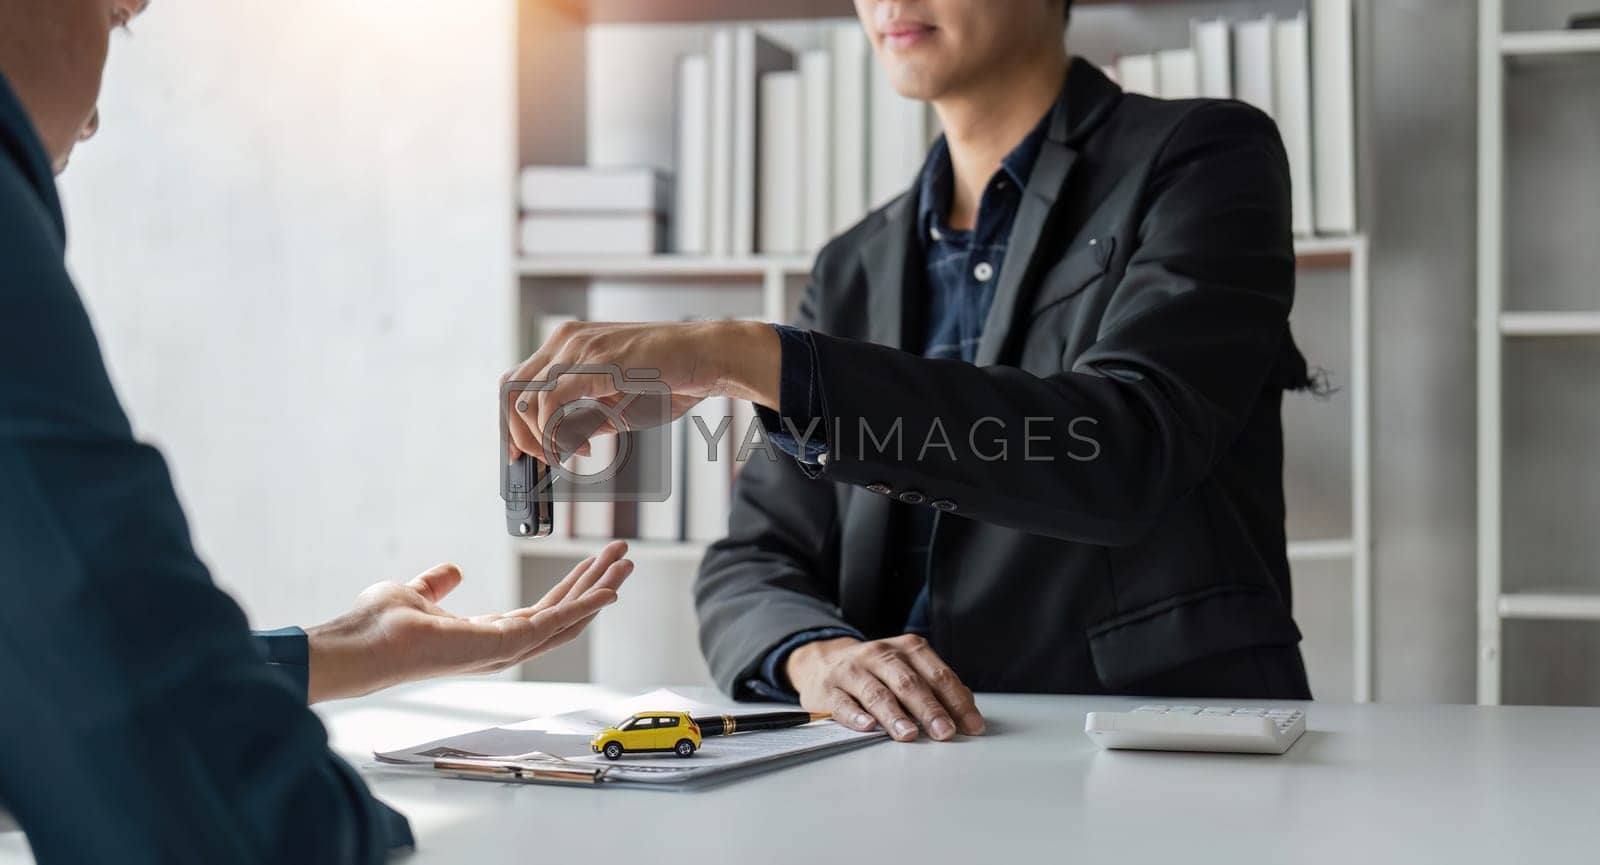 Royalty free image of Loan approver, businessman giving car keys after car loan approval and contract signing by nateemee